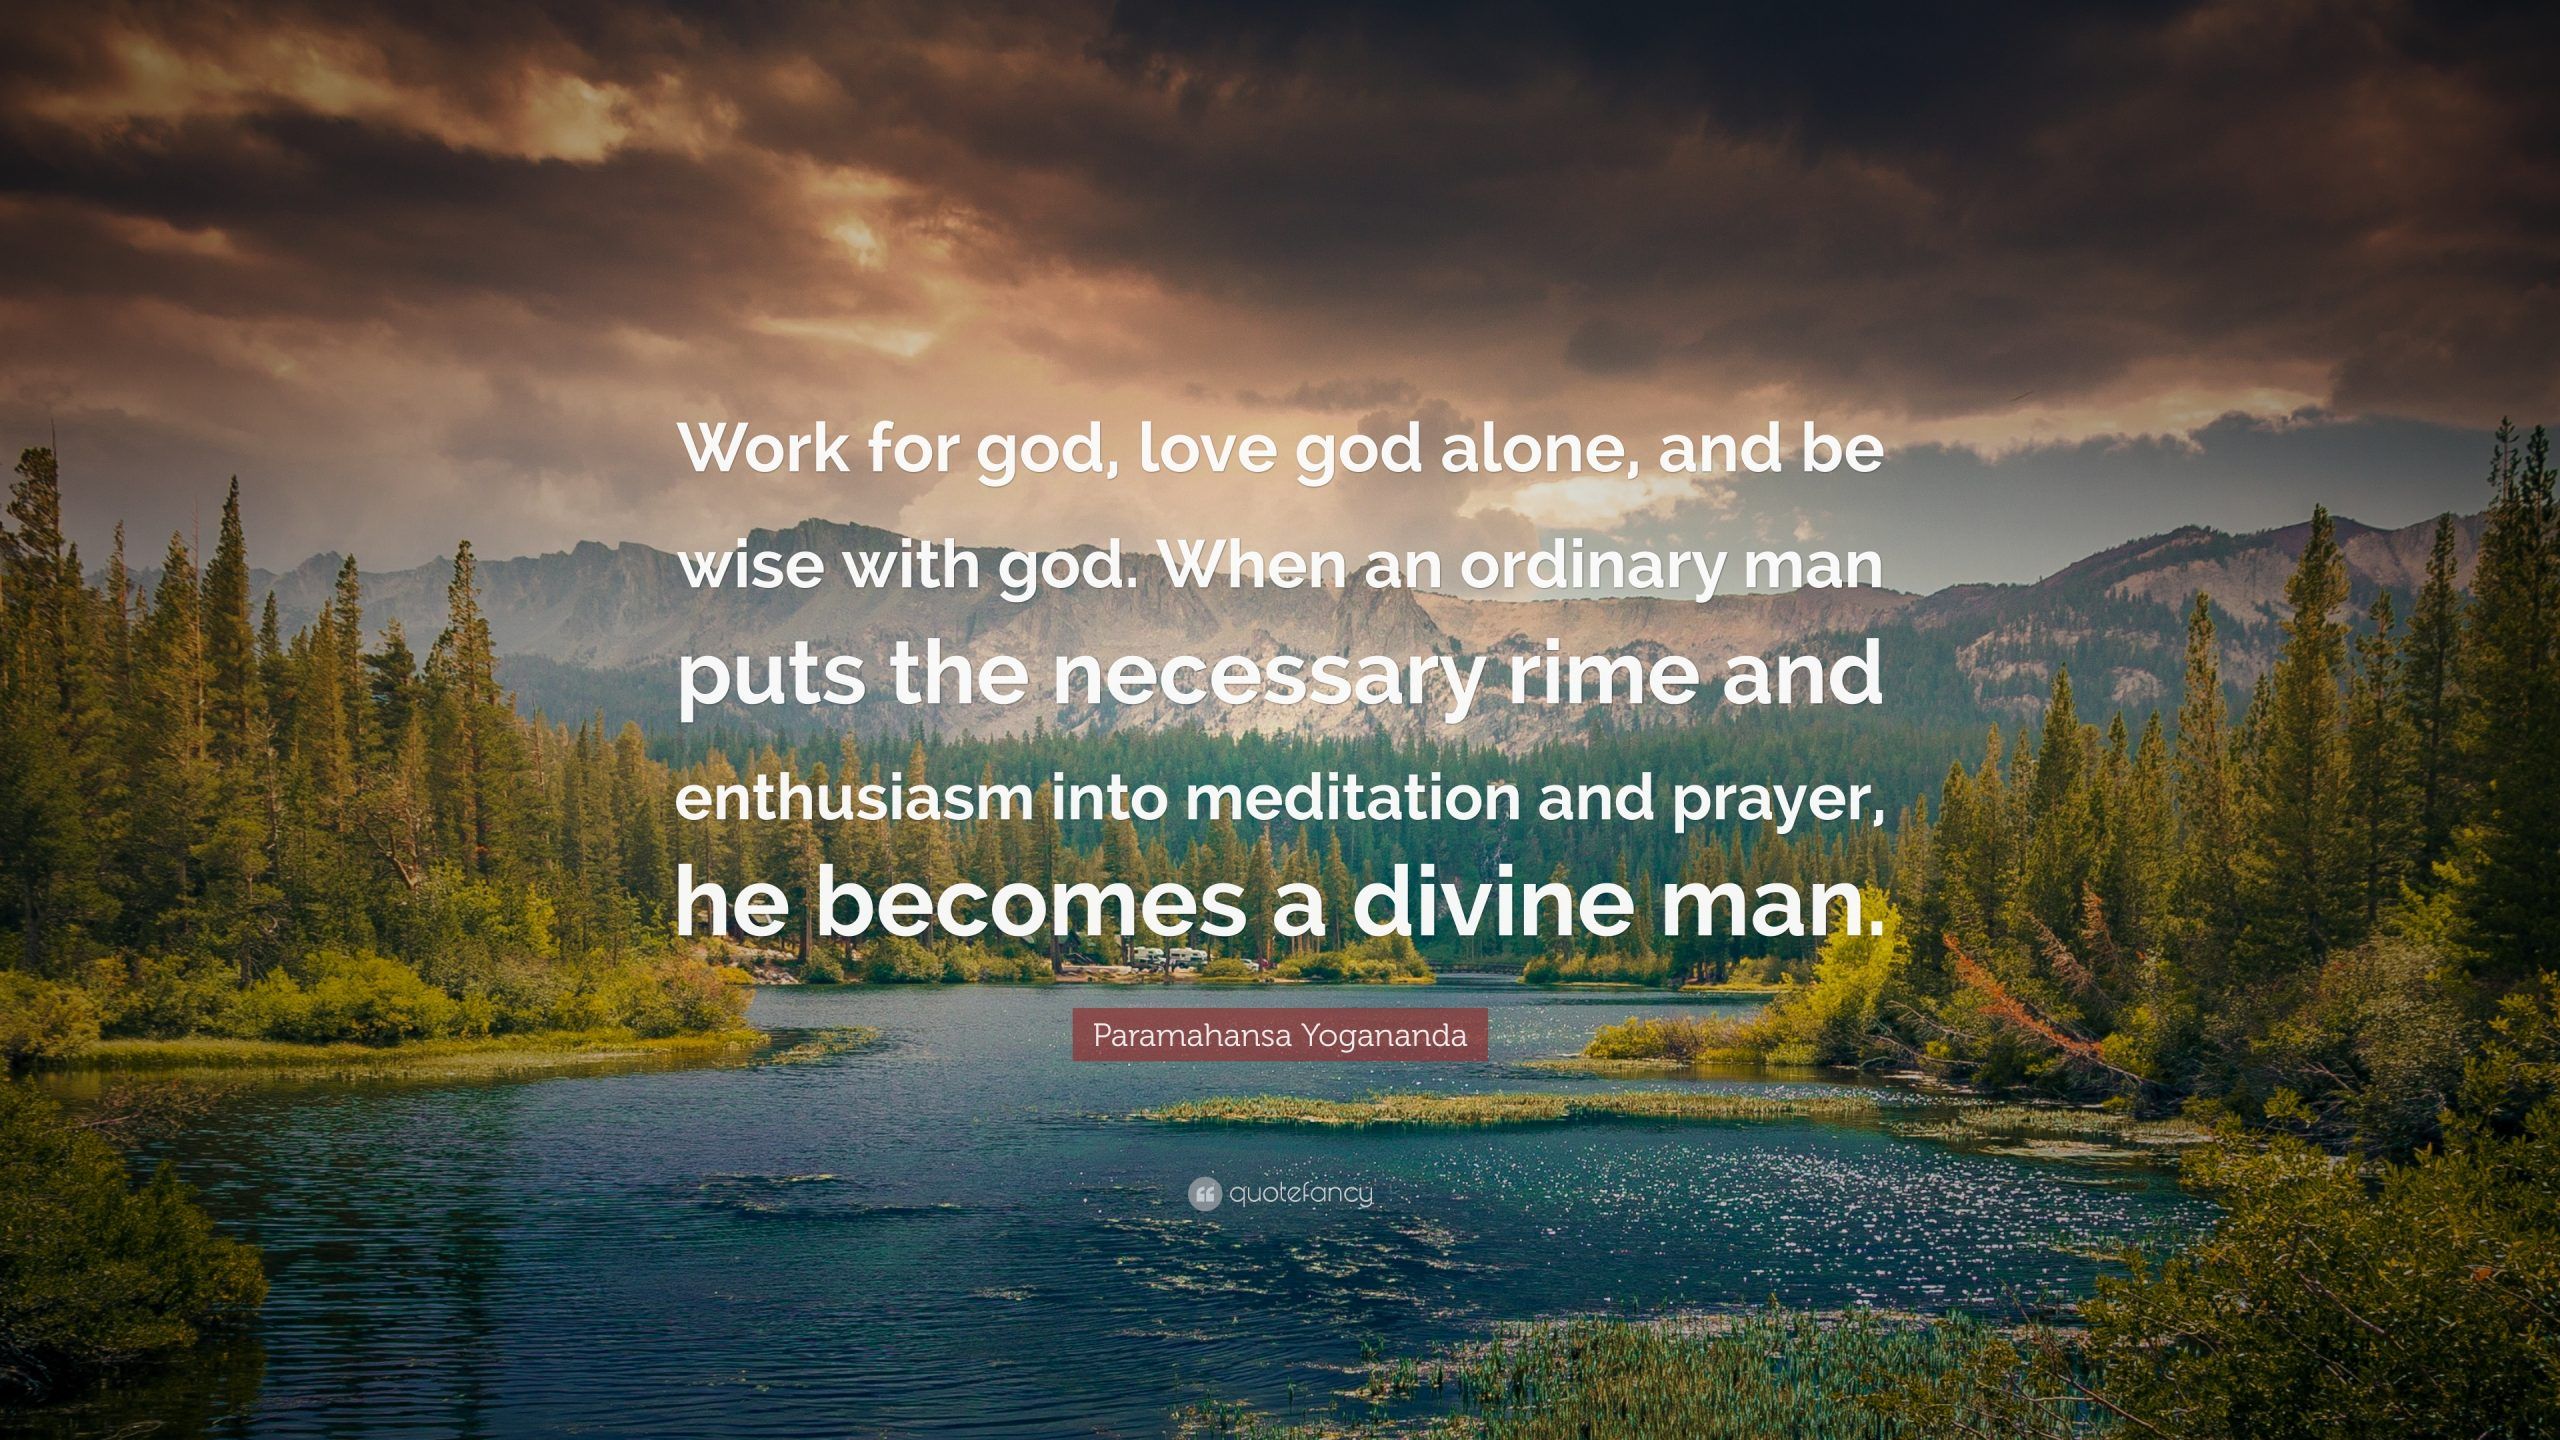 Quotes Paramahansa Yogananda Quote E2809cwork For God Love Alone And Wise With When An Ordinary Man Puts The Necessary Rime Enthusiasm Into Med Wallpaper 45 Quotes Yogananda Picture Ideas